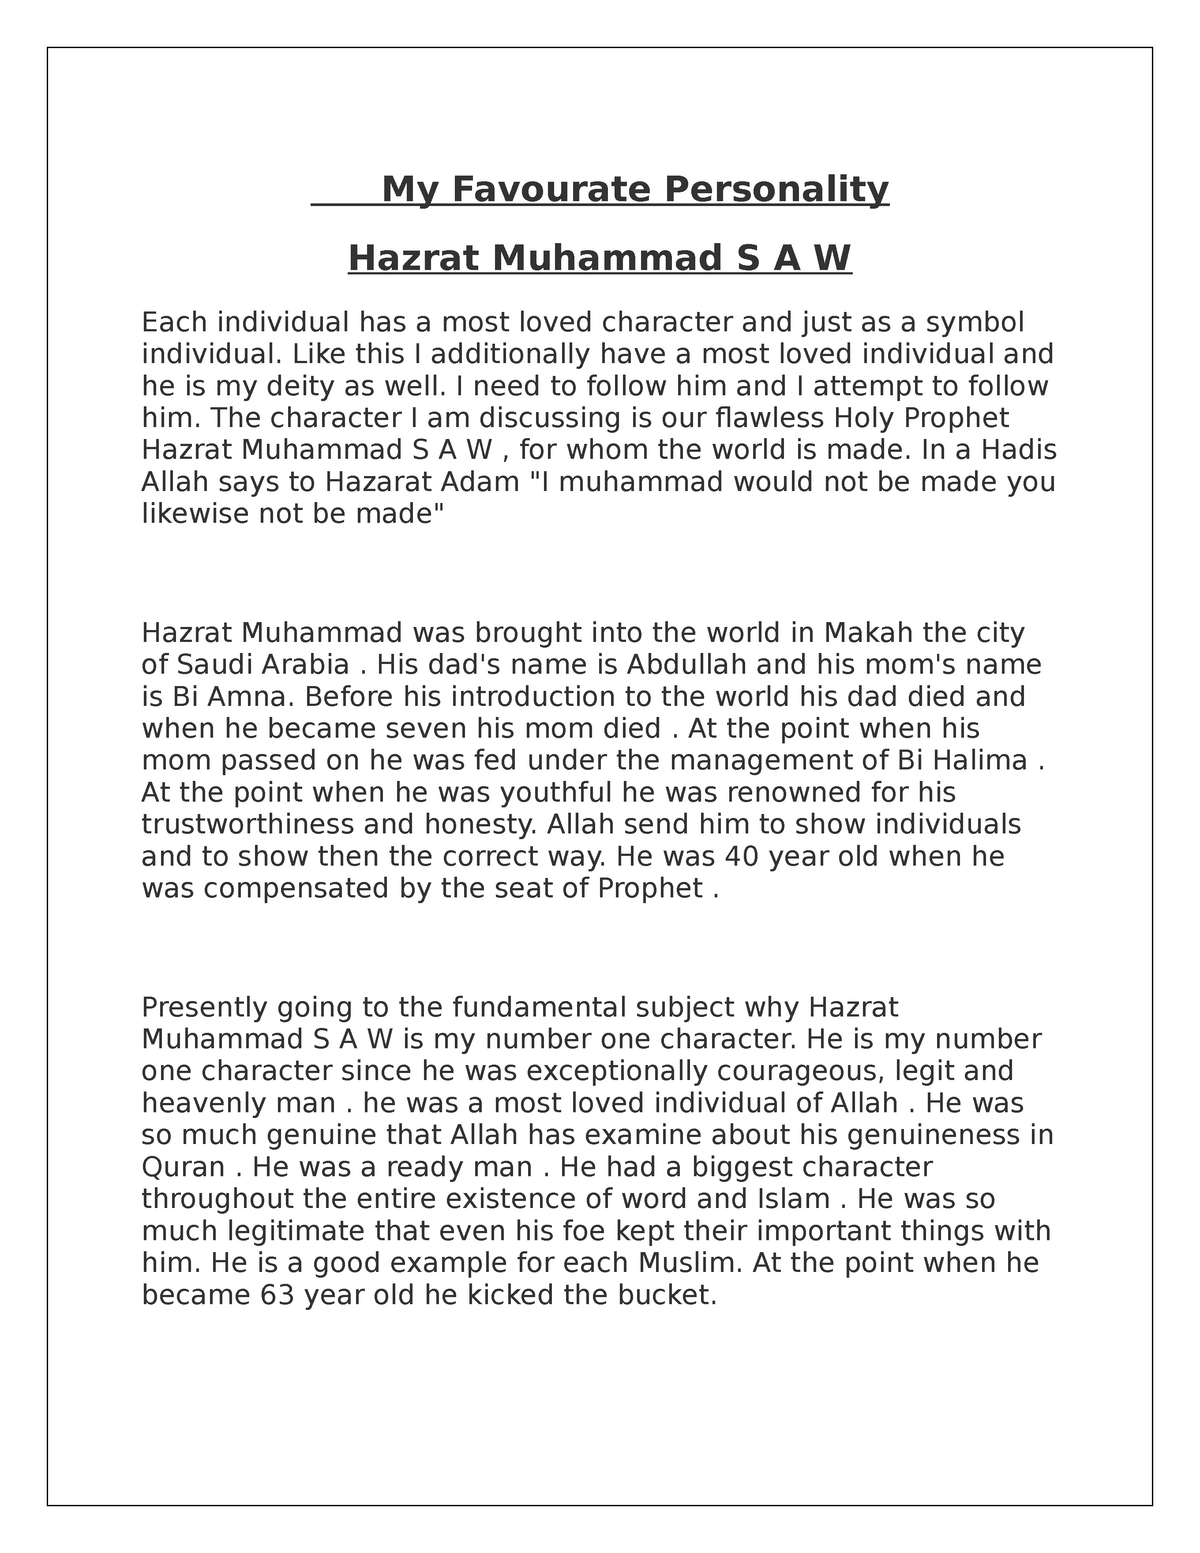 essay on my favourite personality prophet muhammad